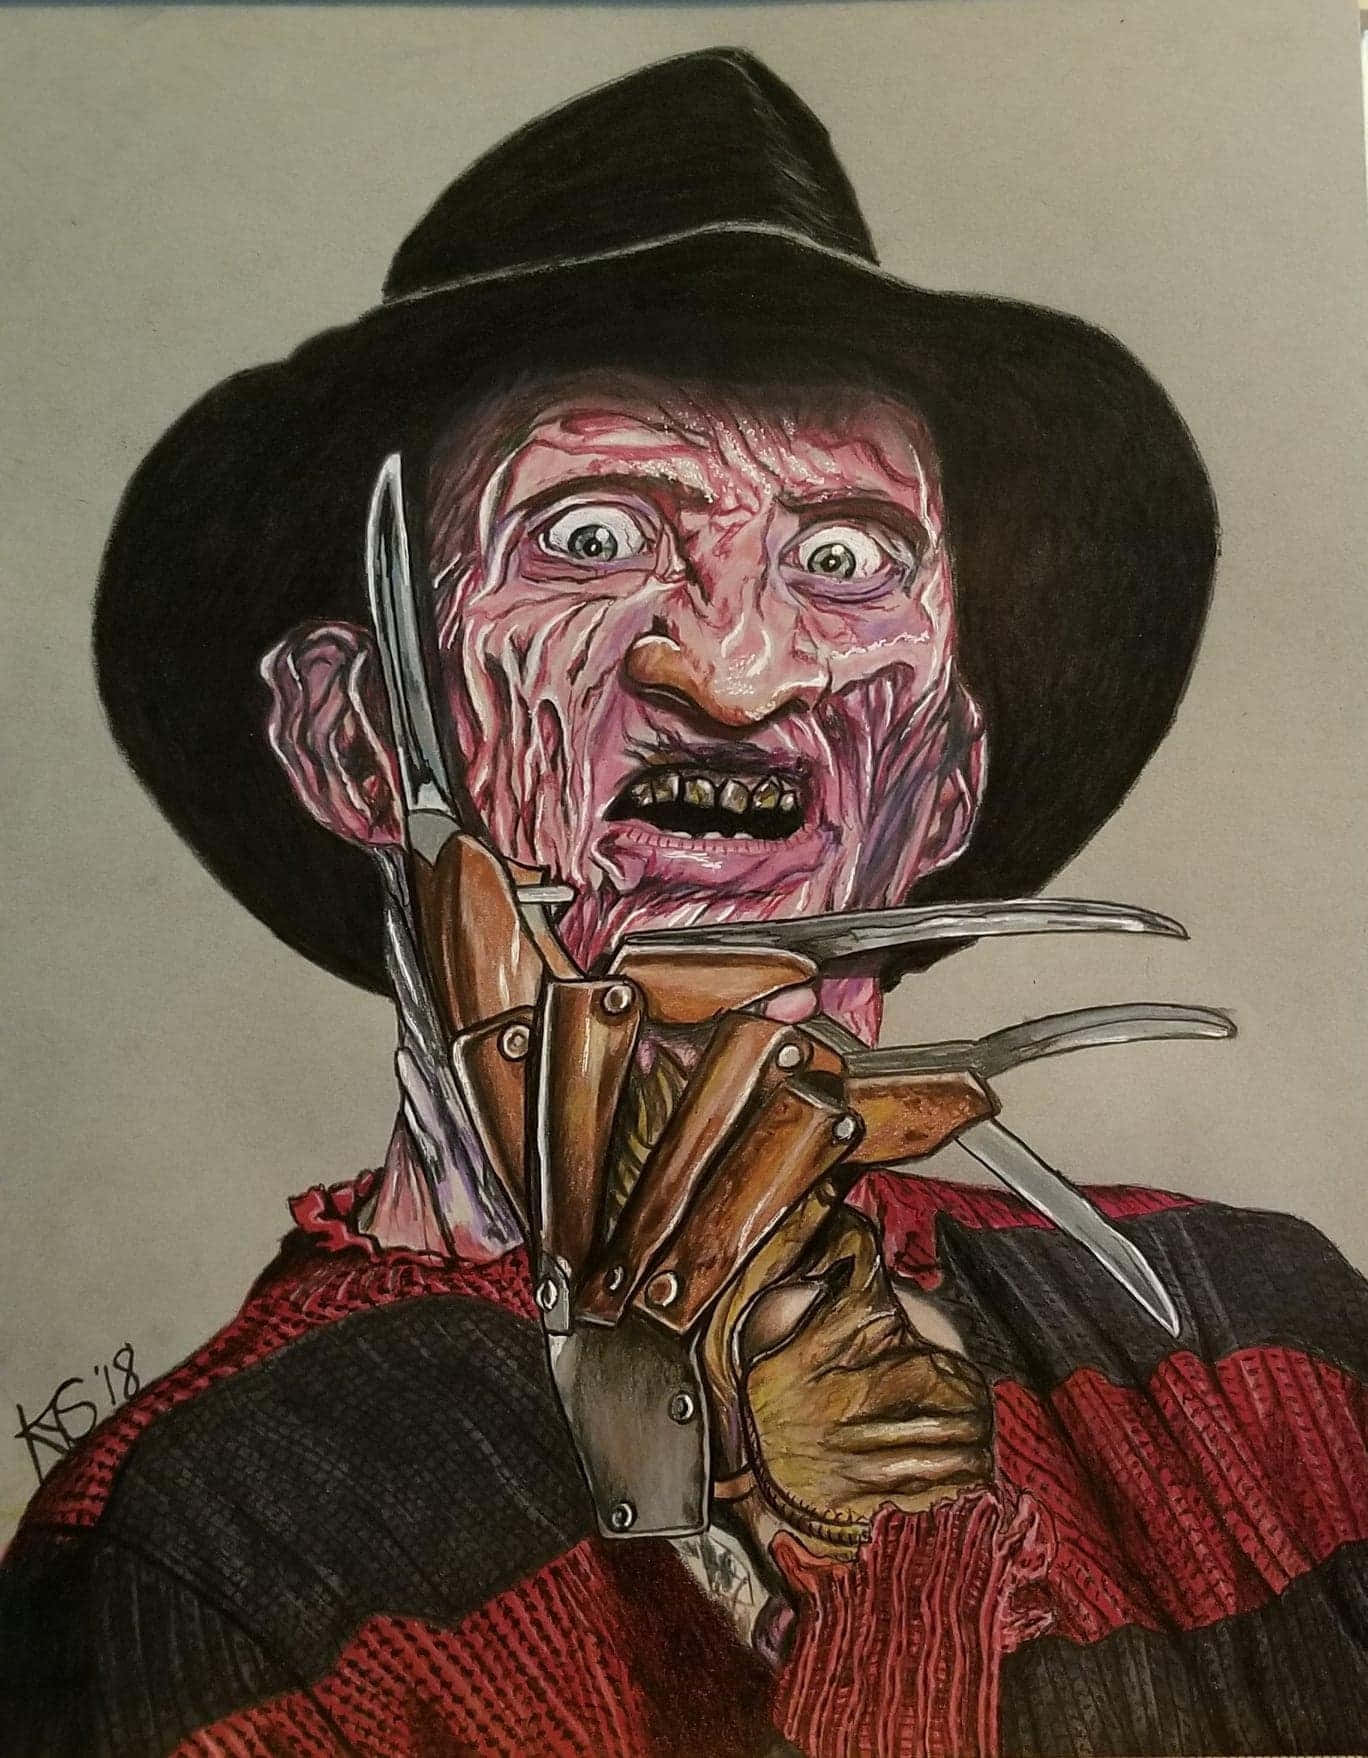 Don't be afraid of the nightmares, Freddy Krueger is here to keep you safe.